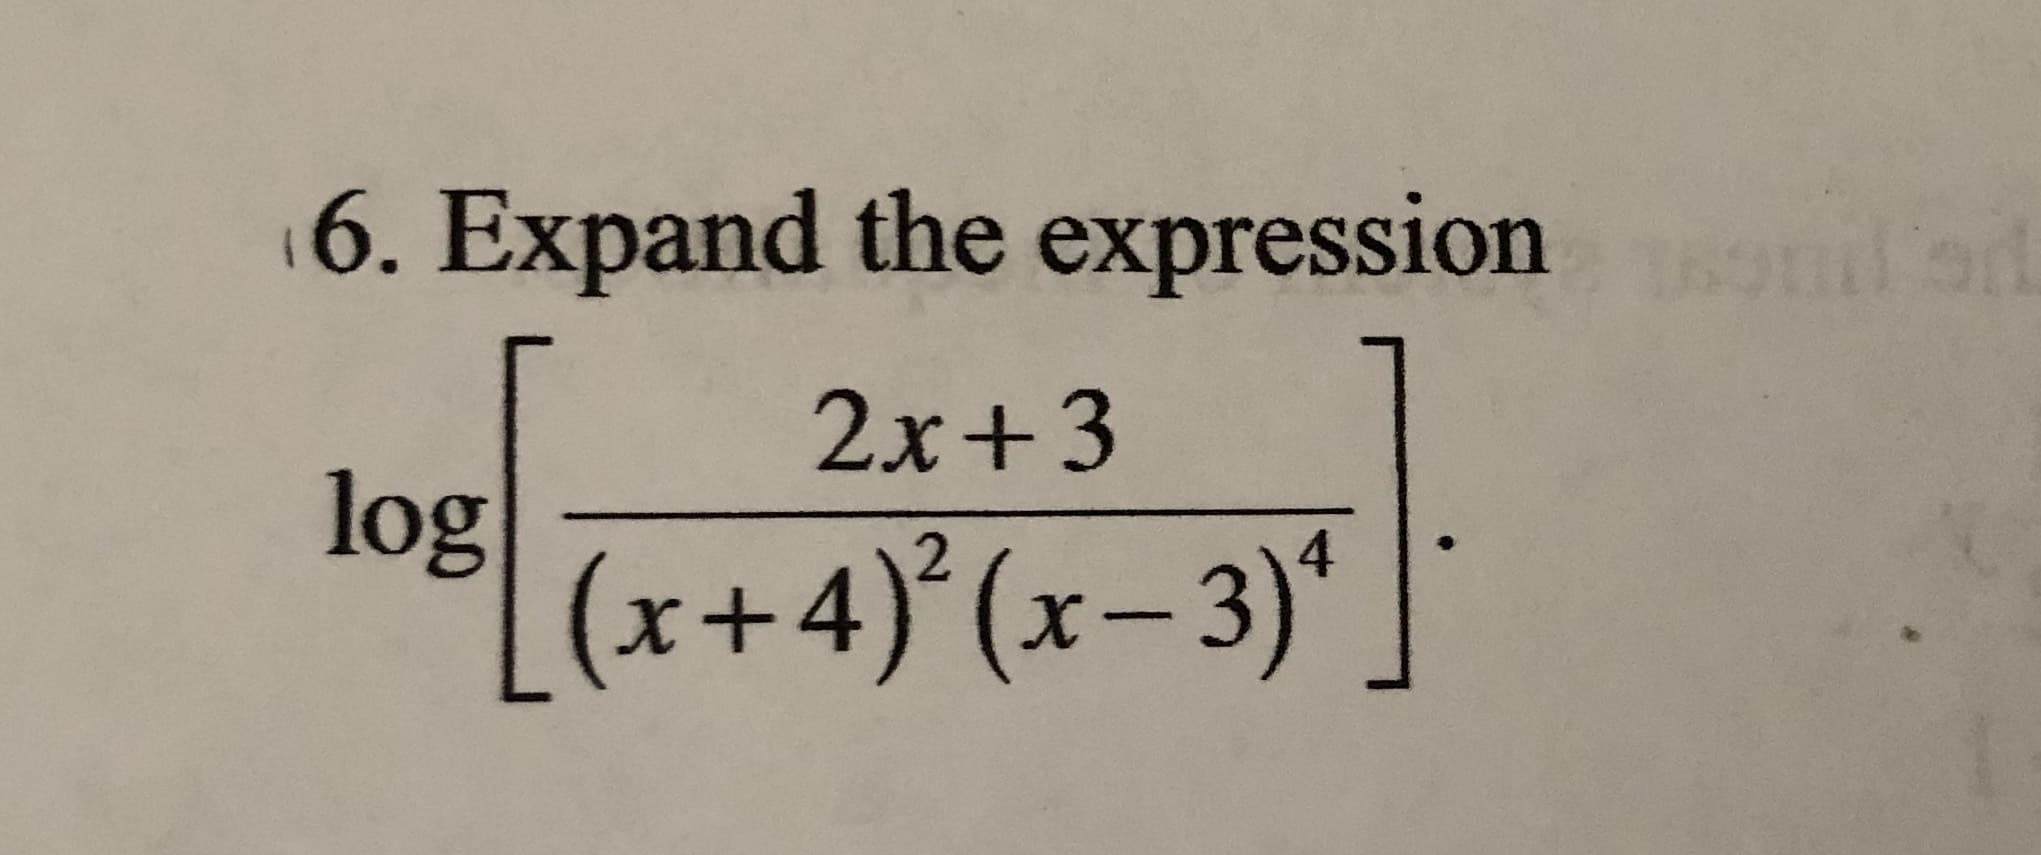 6. Expand the expression
2x+3
log
(x+4)°(x- 3)*
